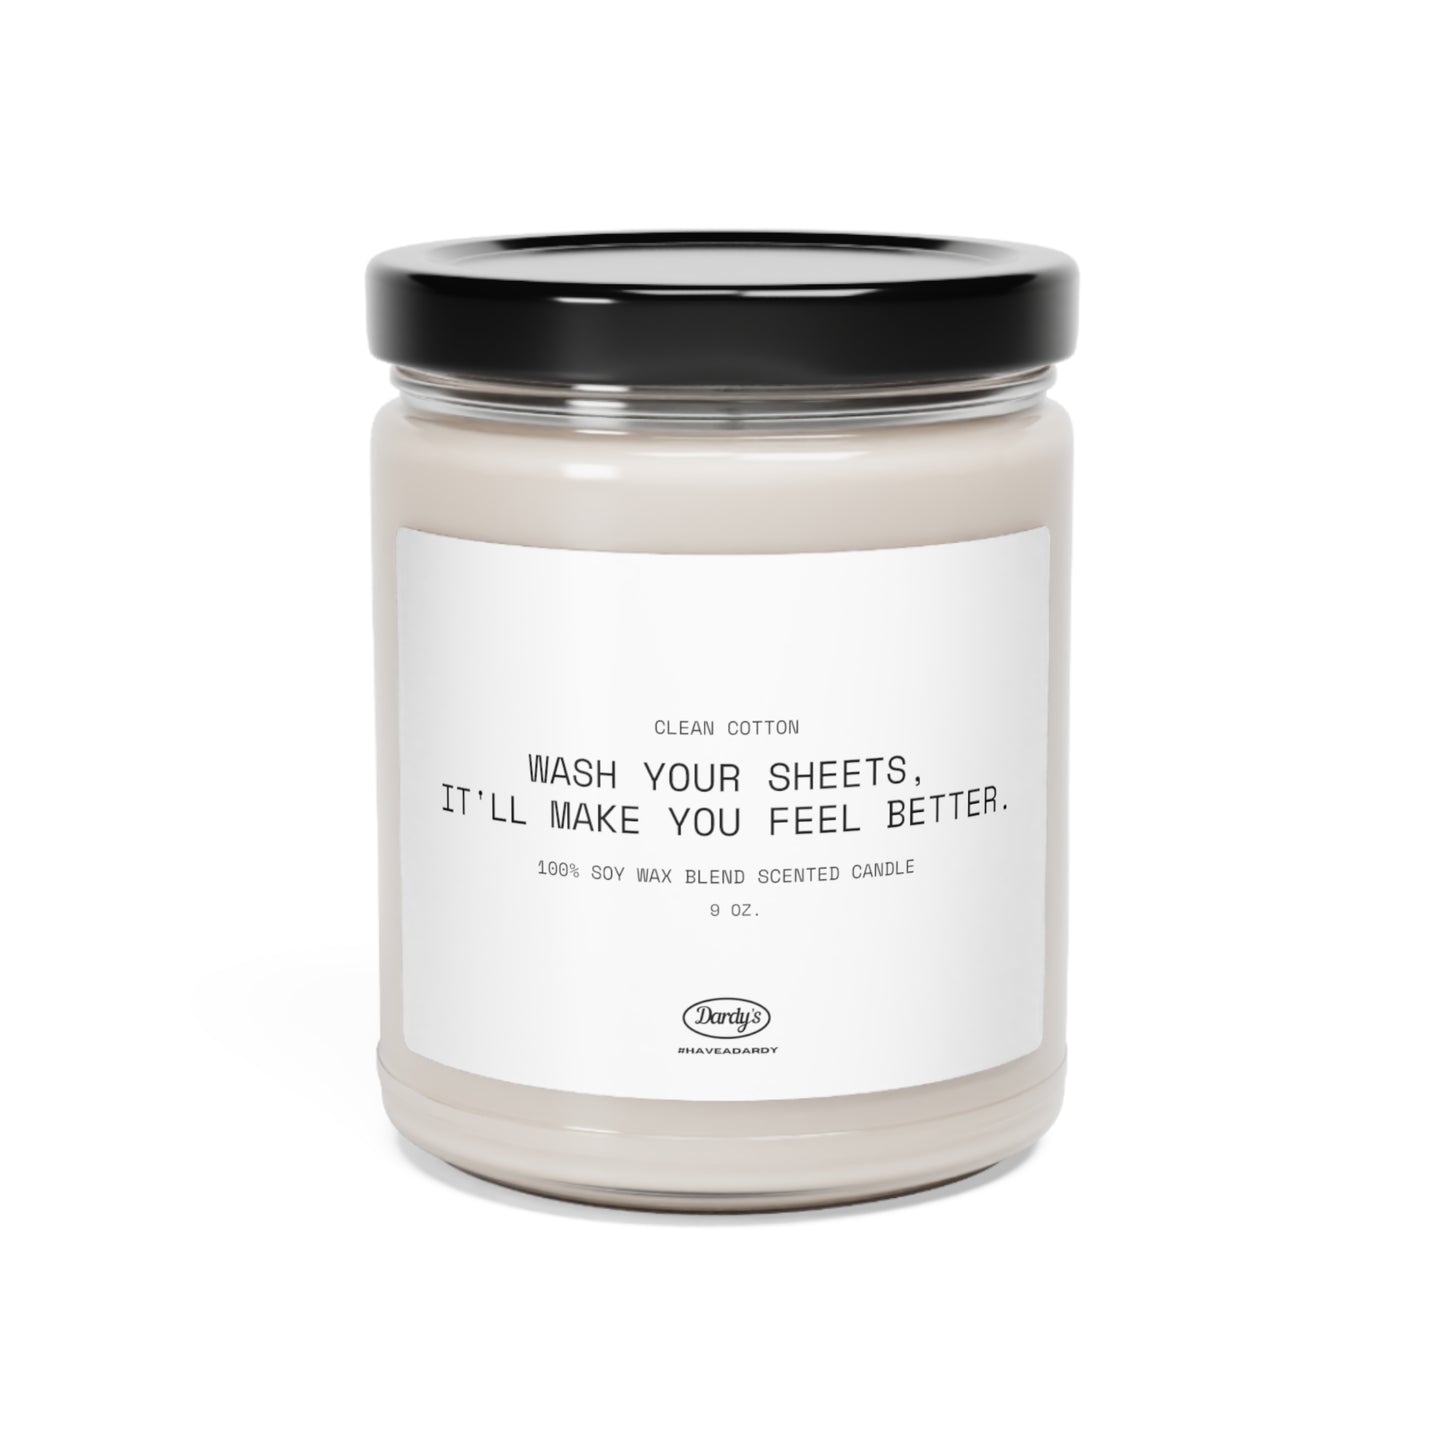 ‘Wash Your Sheets’ 9 oz. Scented Soy Candle